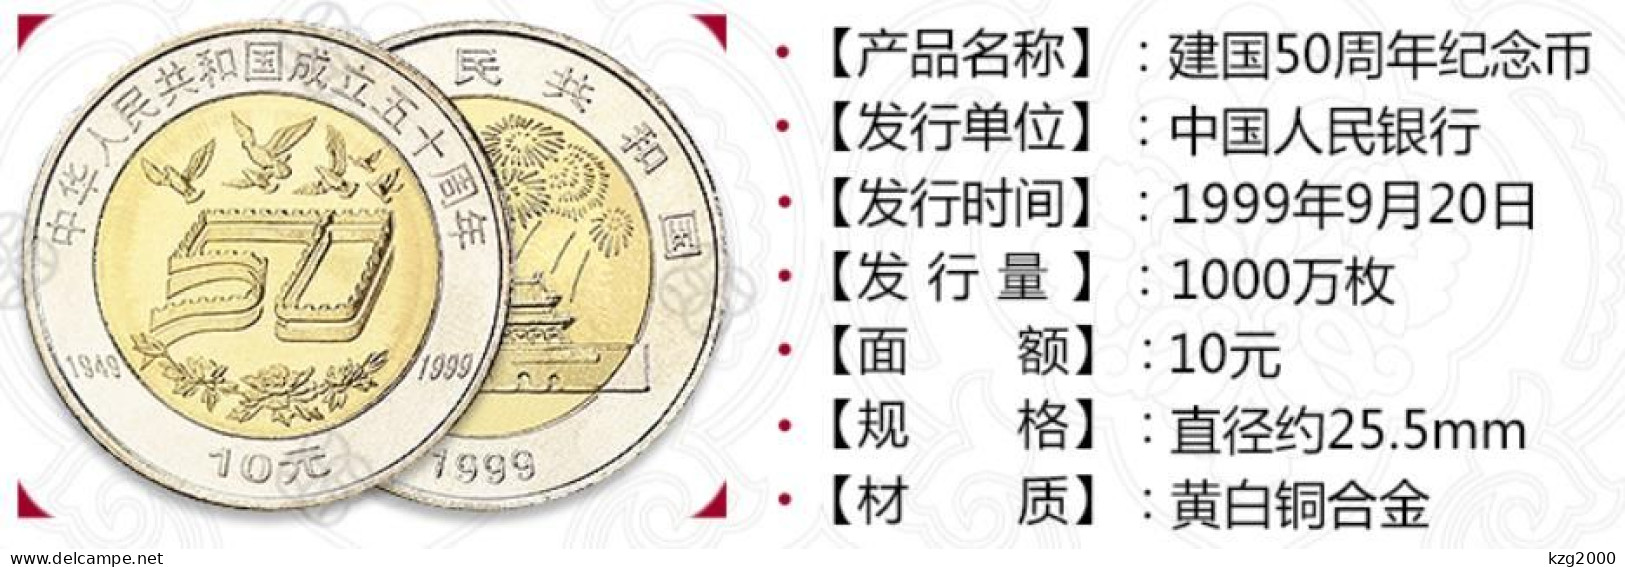 China 10 Yuan Coins 1999 PRC Found 50TH Anniversary COMM Coin 25.5mm Yellow White Copper Alloy Coin 1 Pcs - Cina